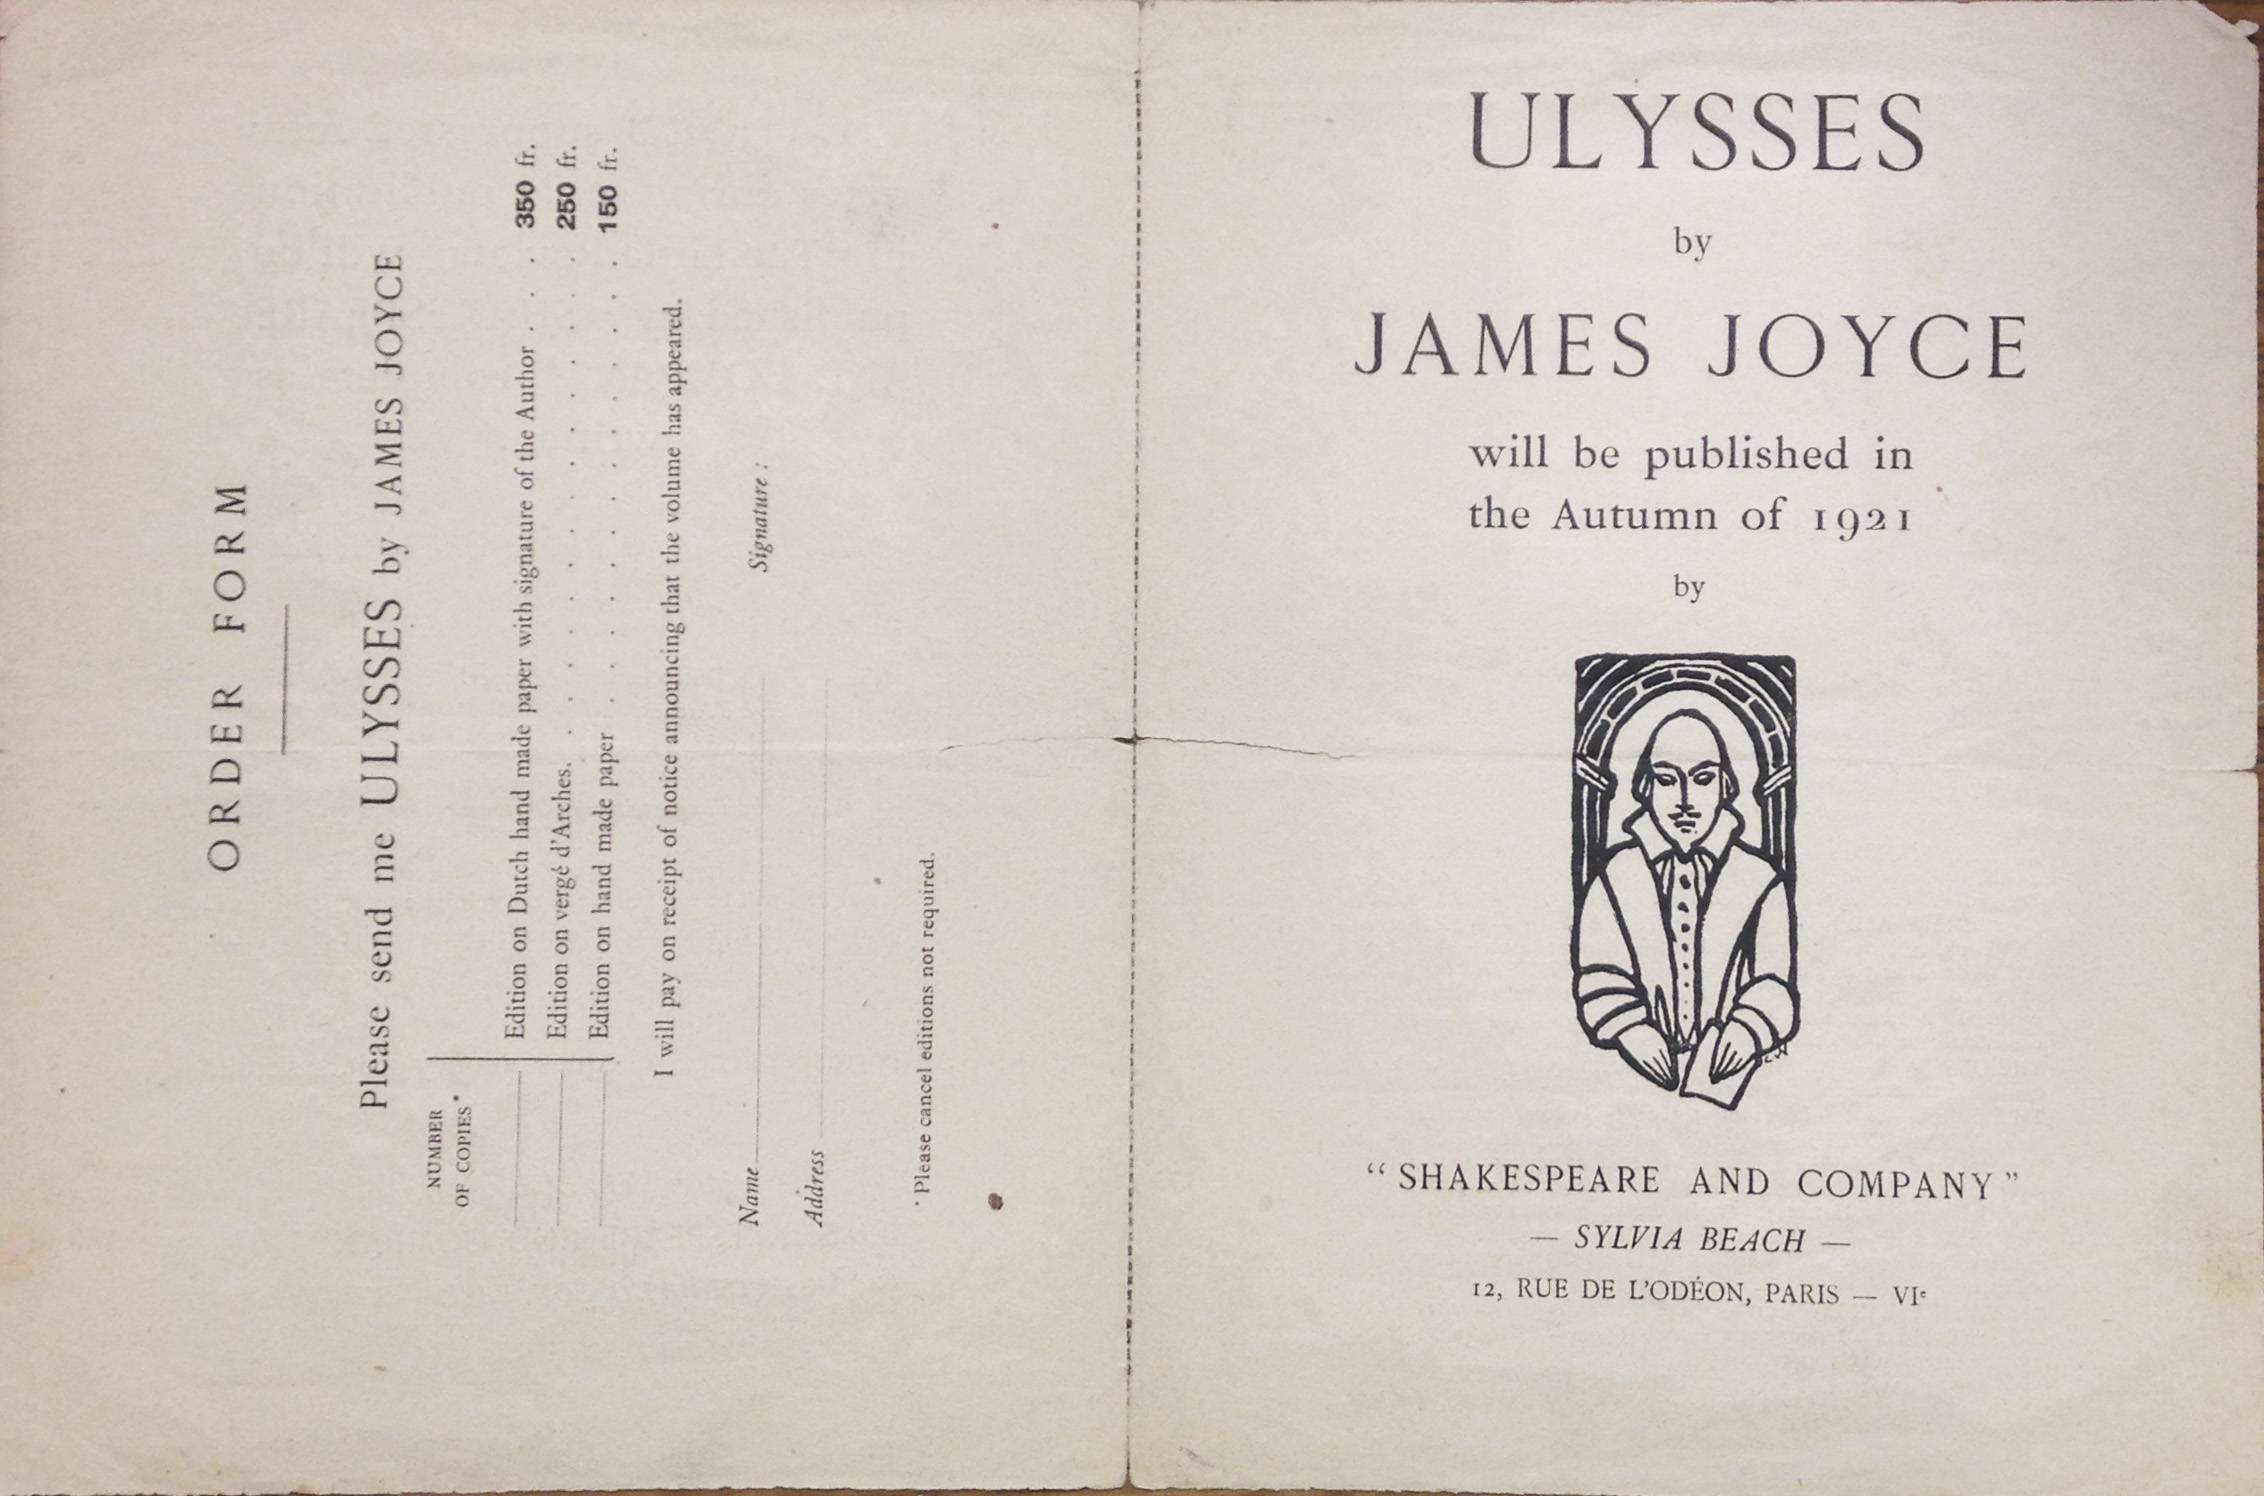 Celebrate Bloomsday with rare Ulysses items at the Illinois RBML